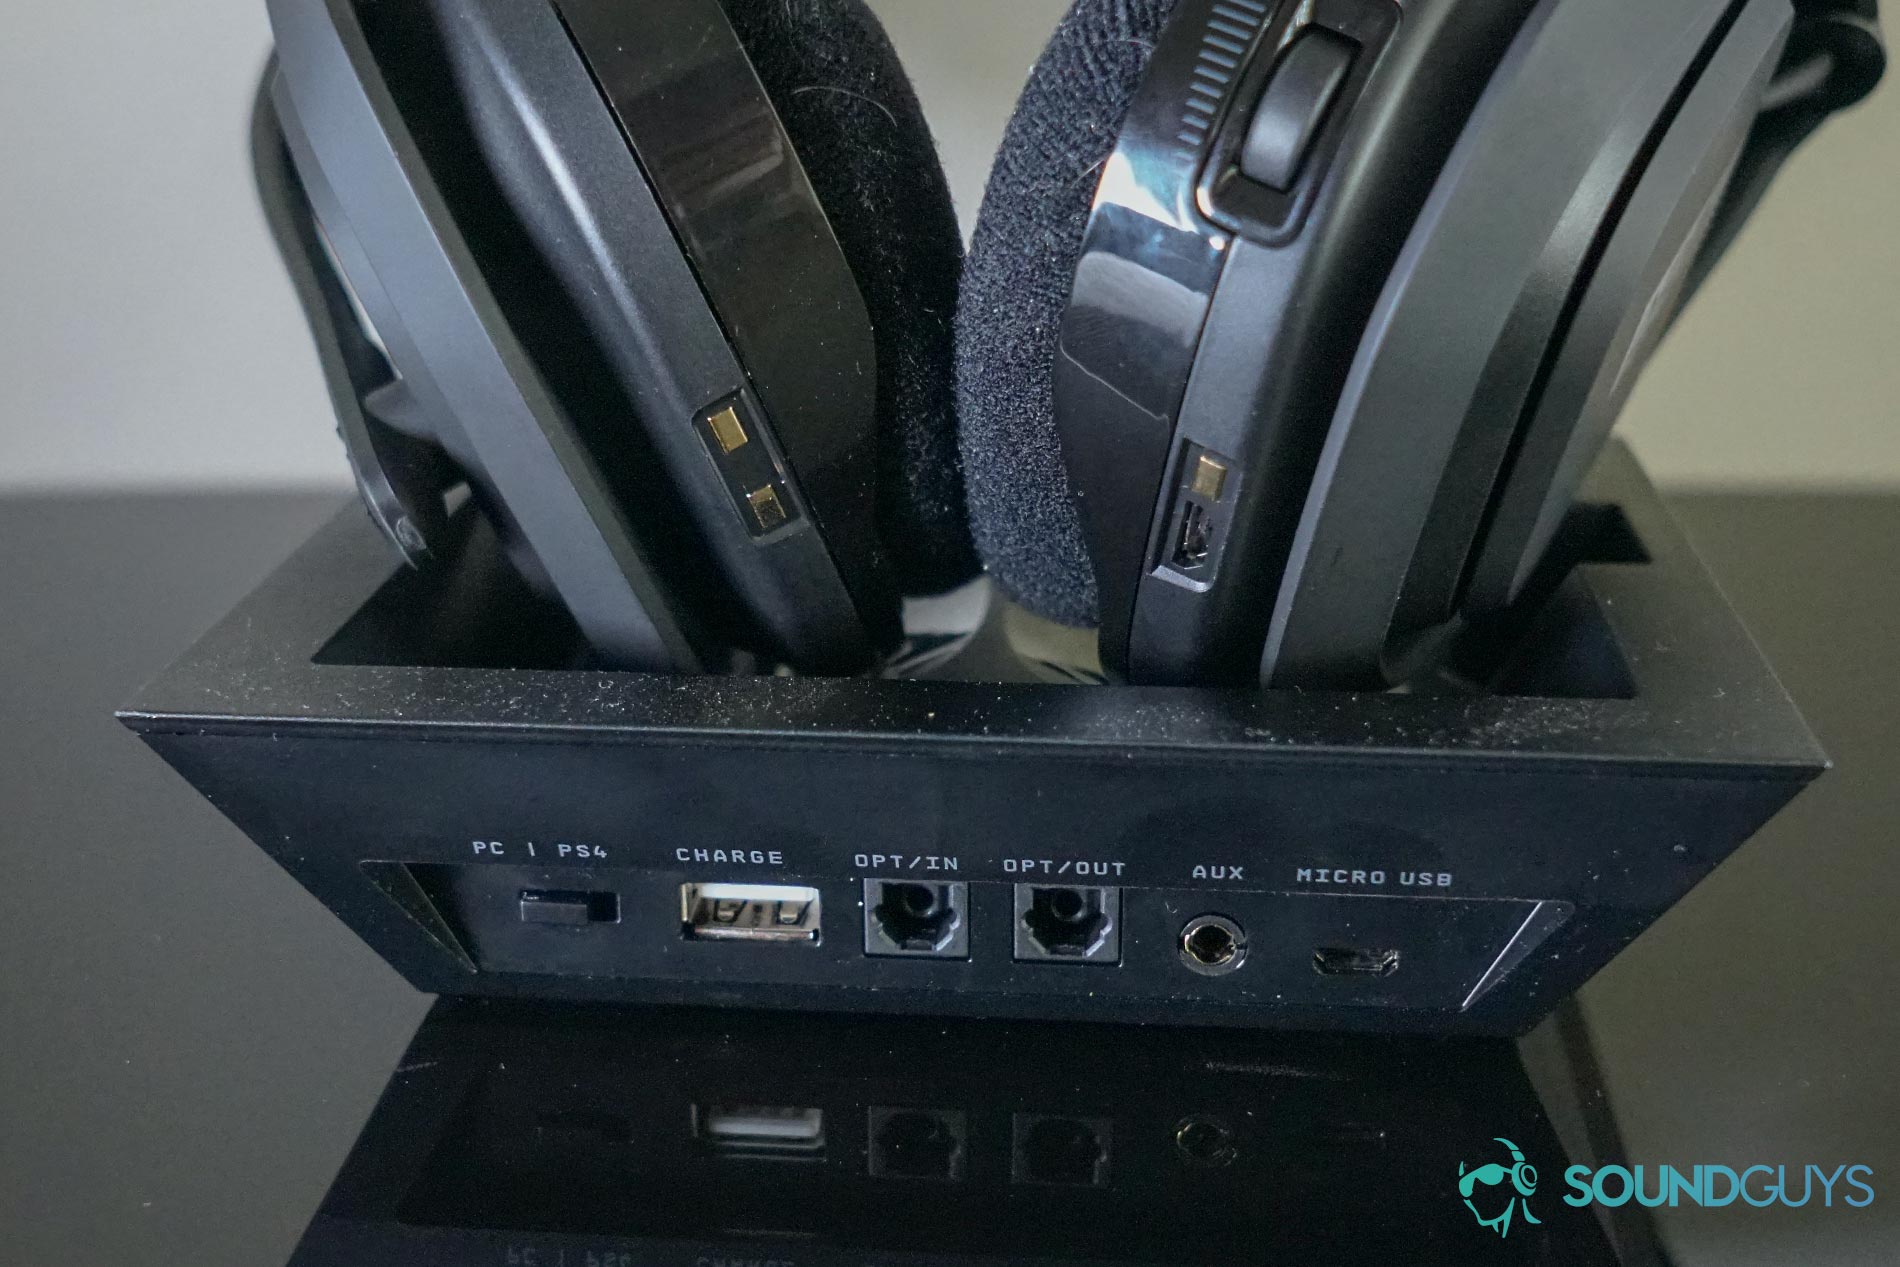 The Astro A50 sits on its base station, with their ports visible.